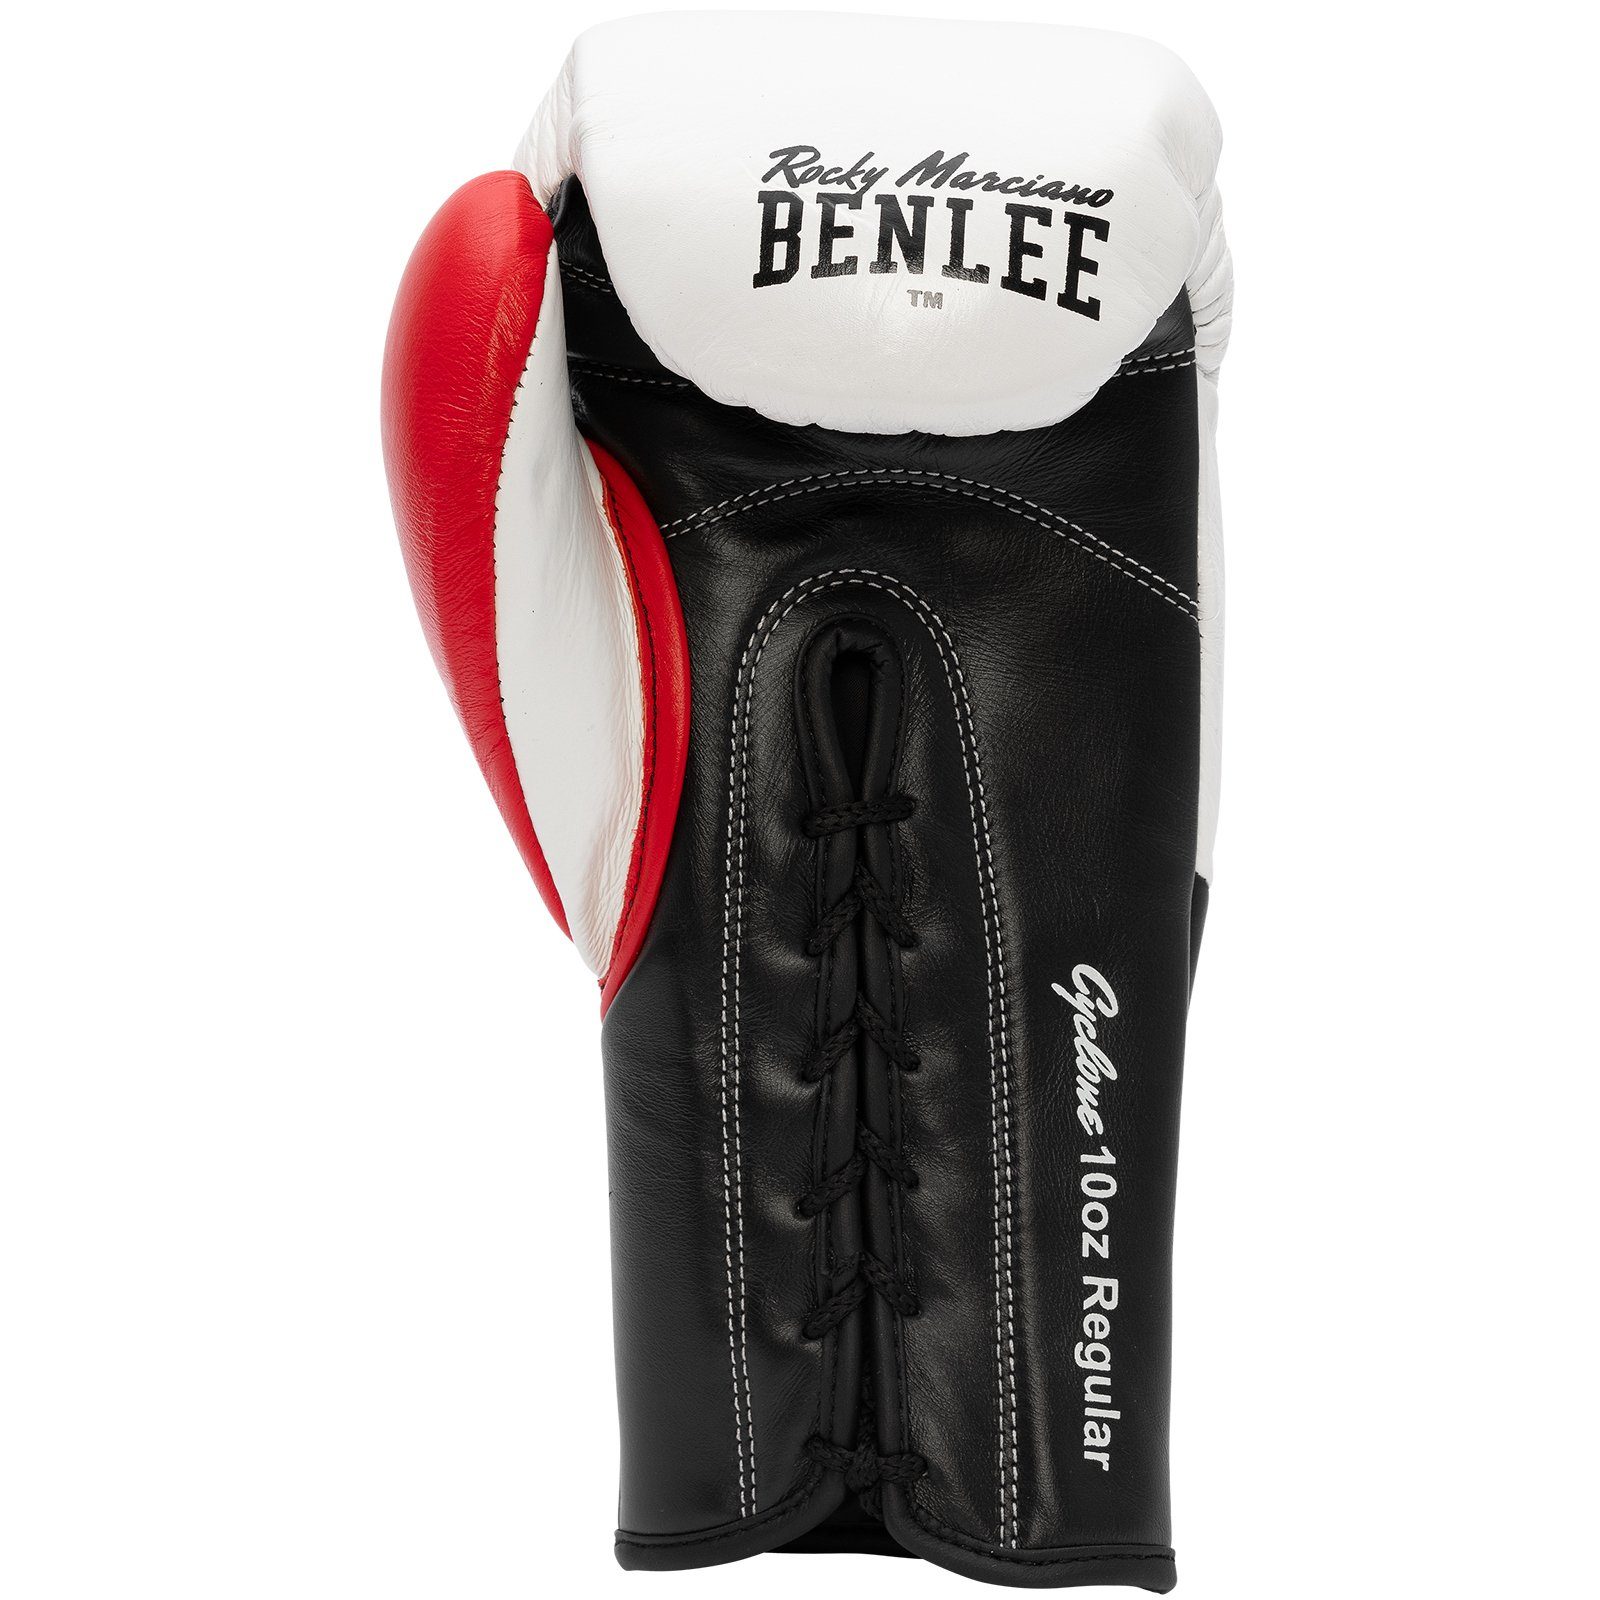 Benlee Rocky Marciano CYCLONE White/Black/Red Boxhandschuhe